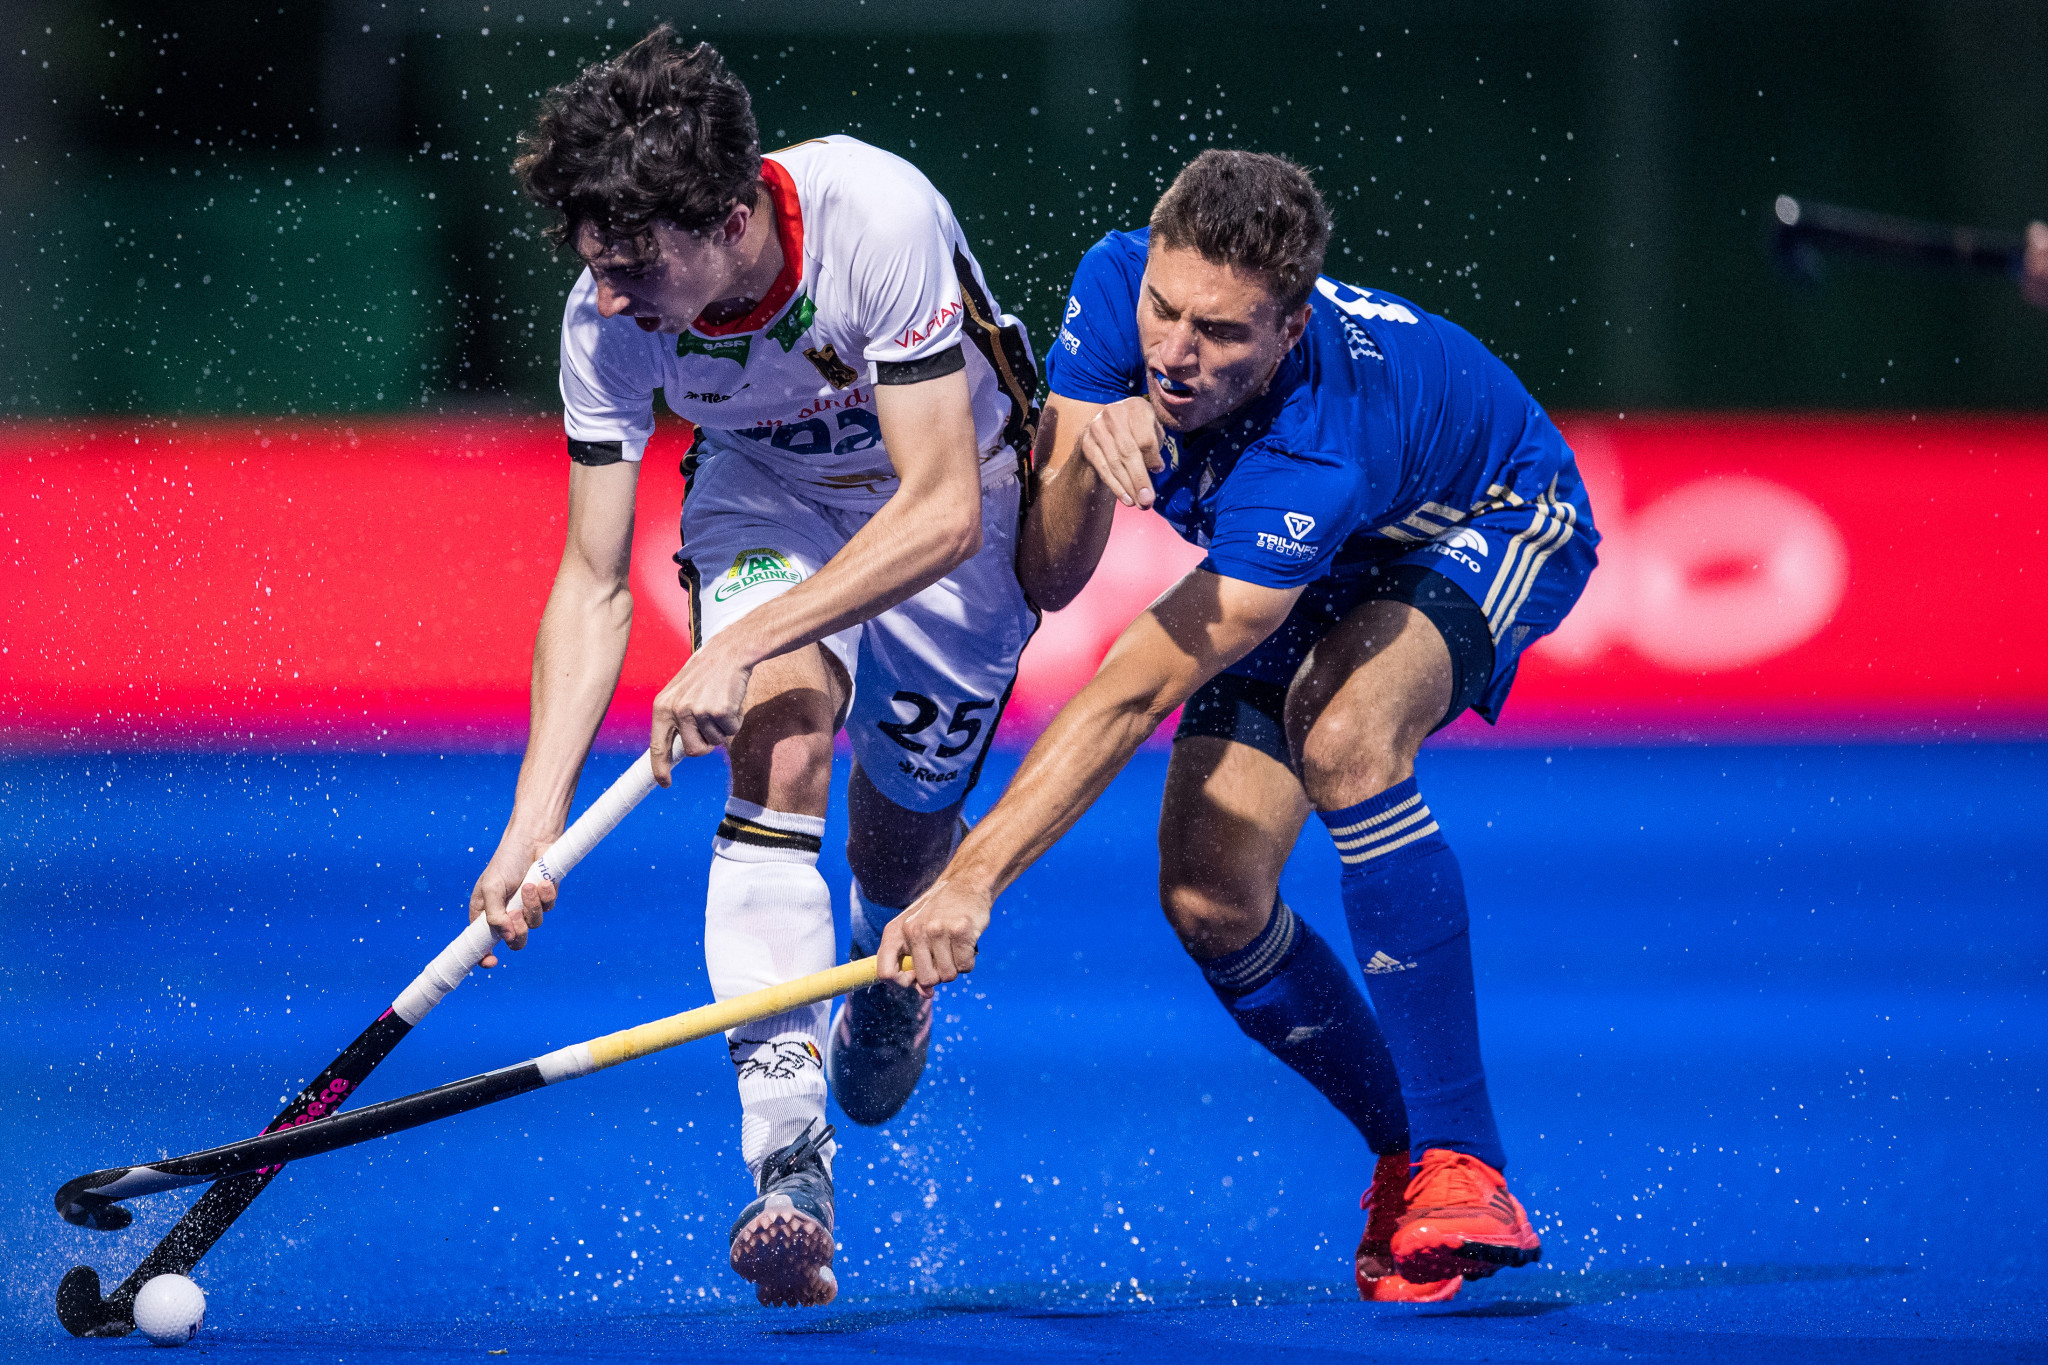 Germany claimed the shootout bonus point in their clash against Argentina in the men's FIH Pro League ©Getty Images